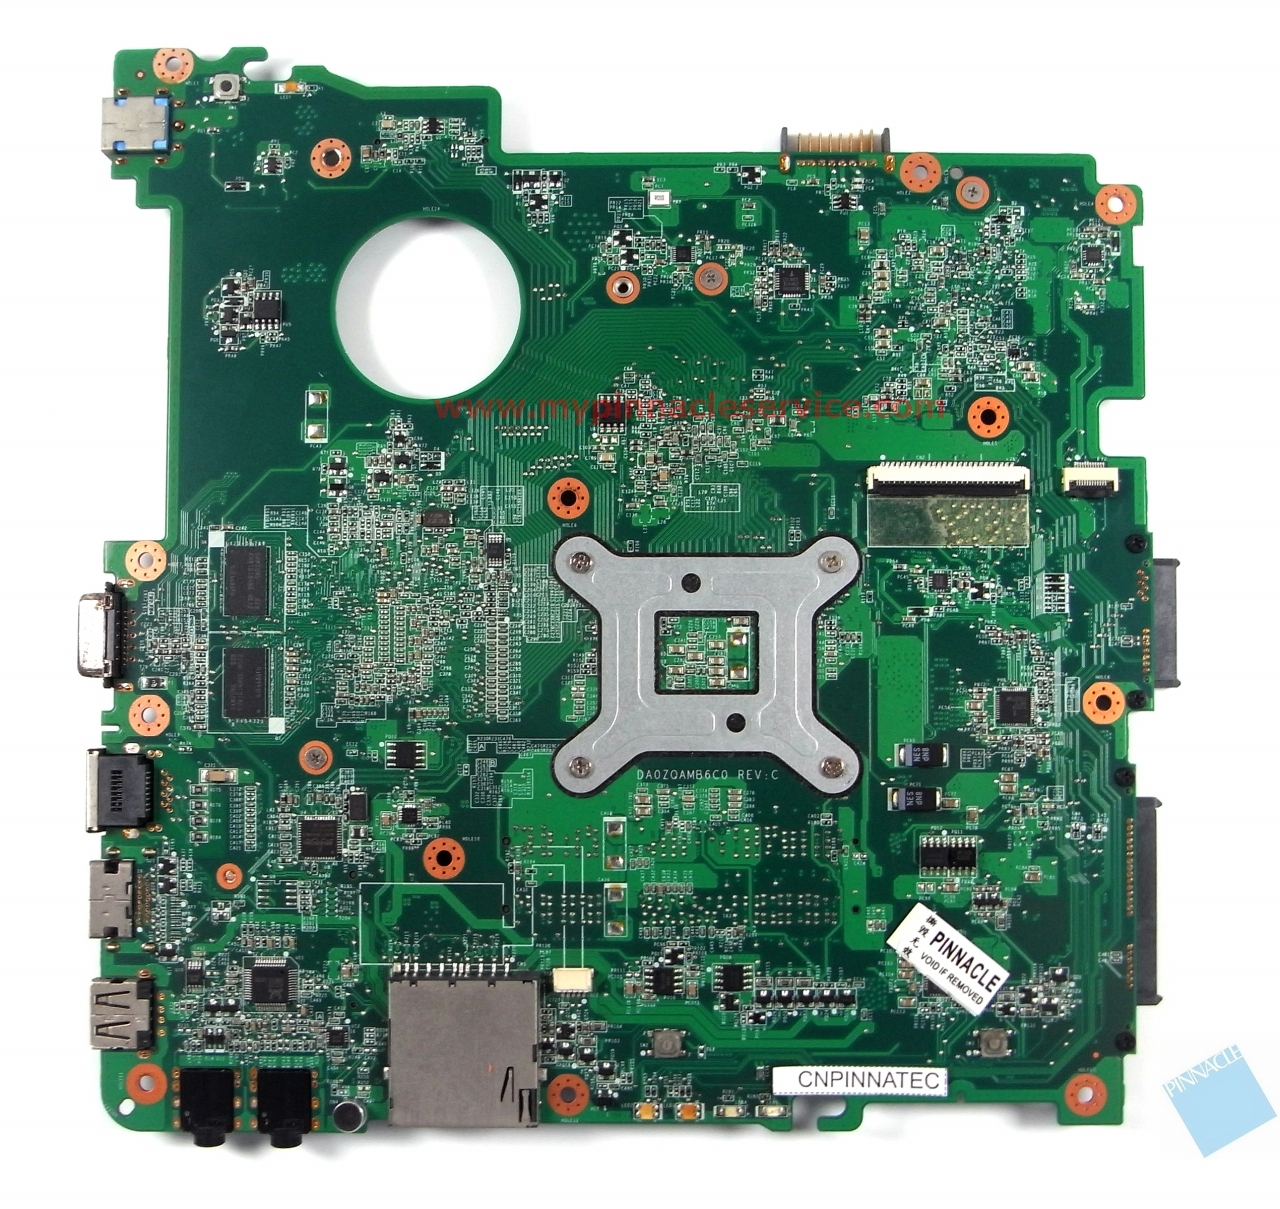 mbrp636001-motherboard-for-acer-aspire-4552-4552g-da0zqamb6c0-31zqamb0020-rimg0027.jpg